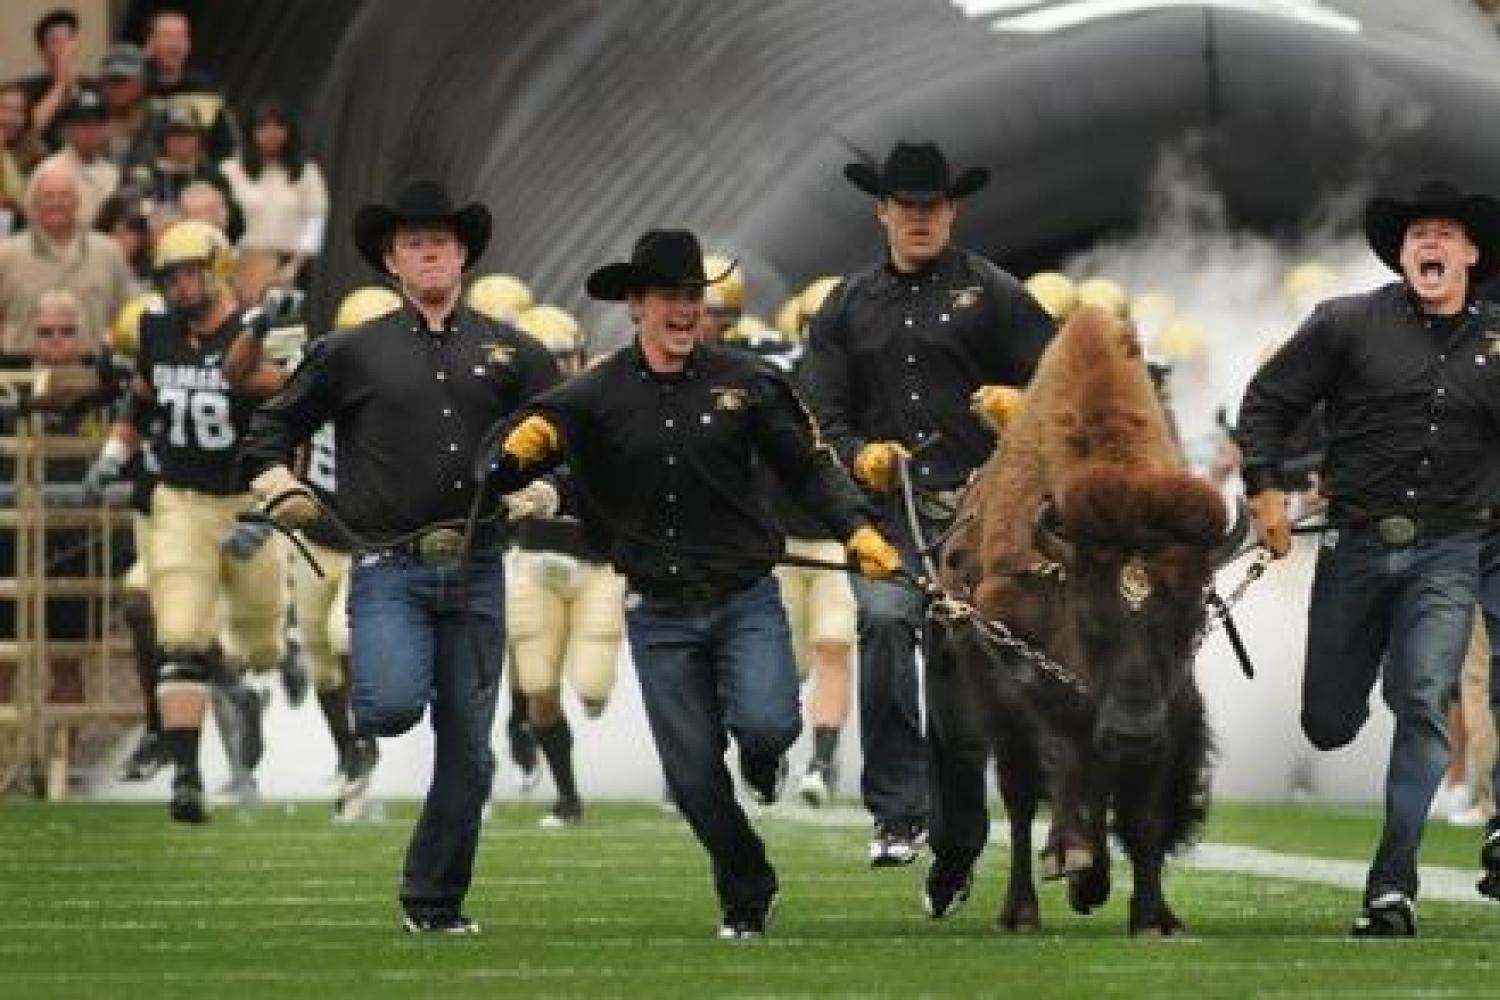 Running Ralphie is one of the most storied traditions in all of college athletics.